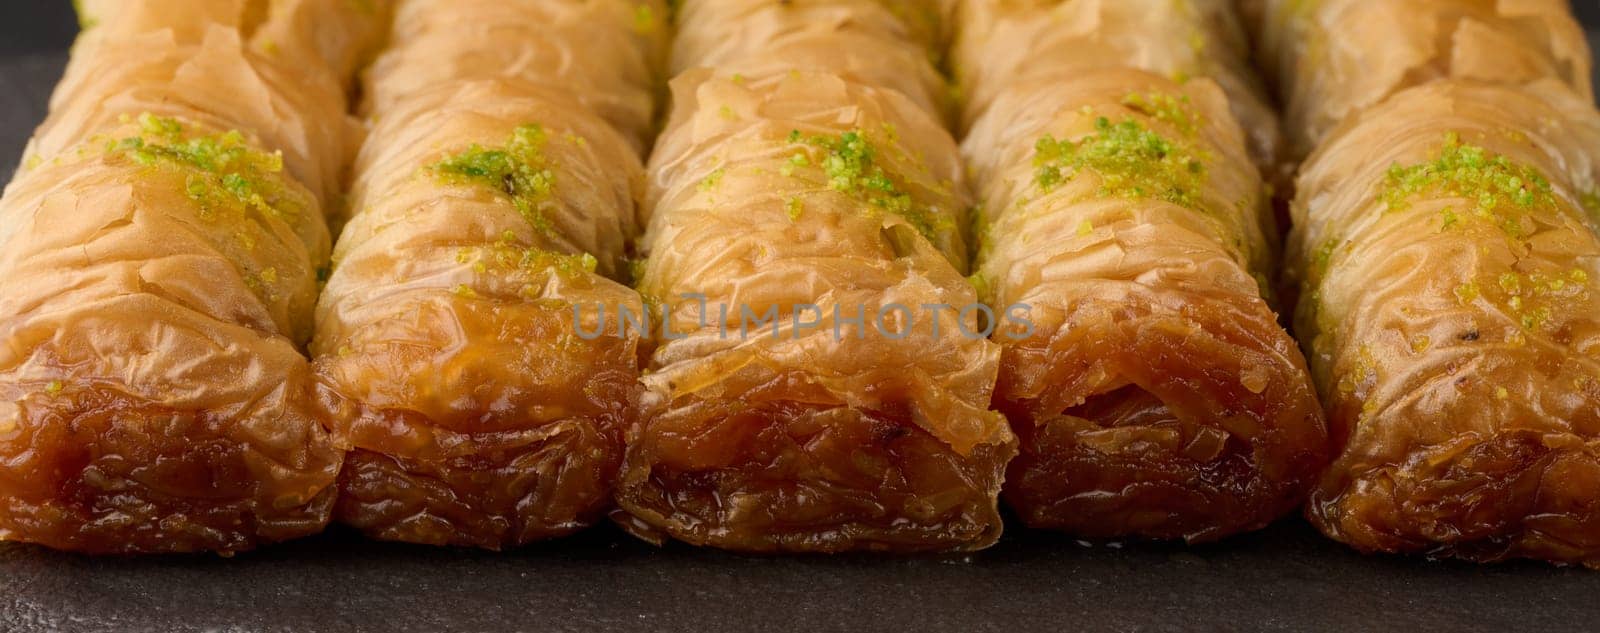 Pieces of baked baklava in honey and sprinkled with pistachios on a black board by ndanko